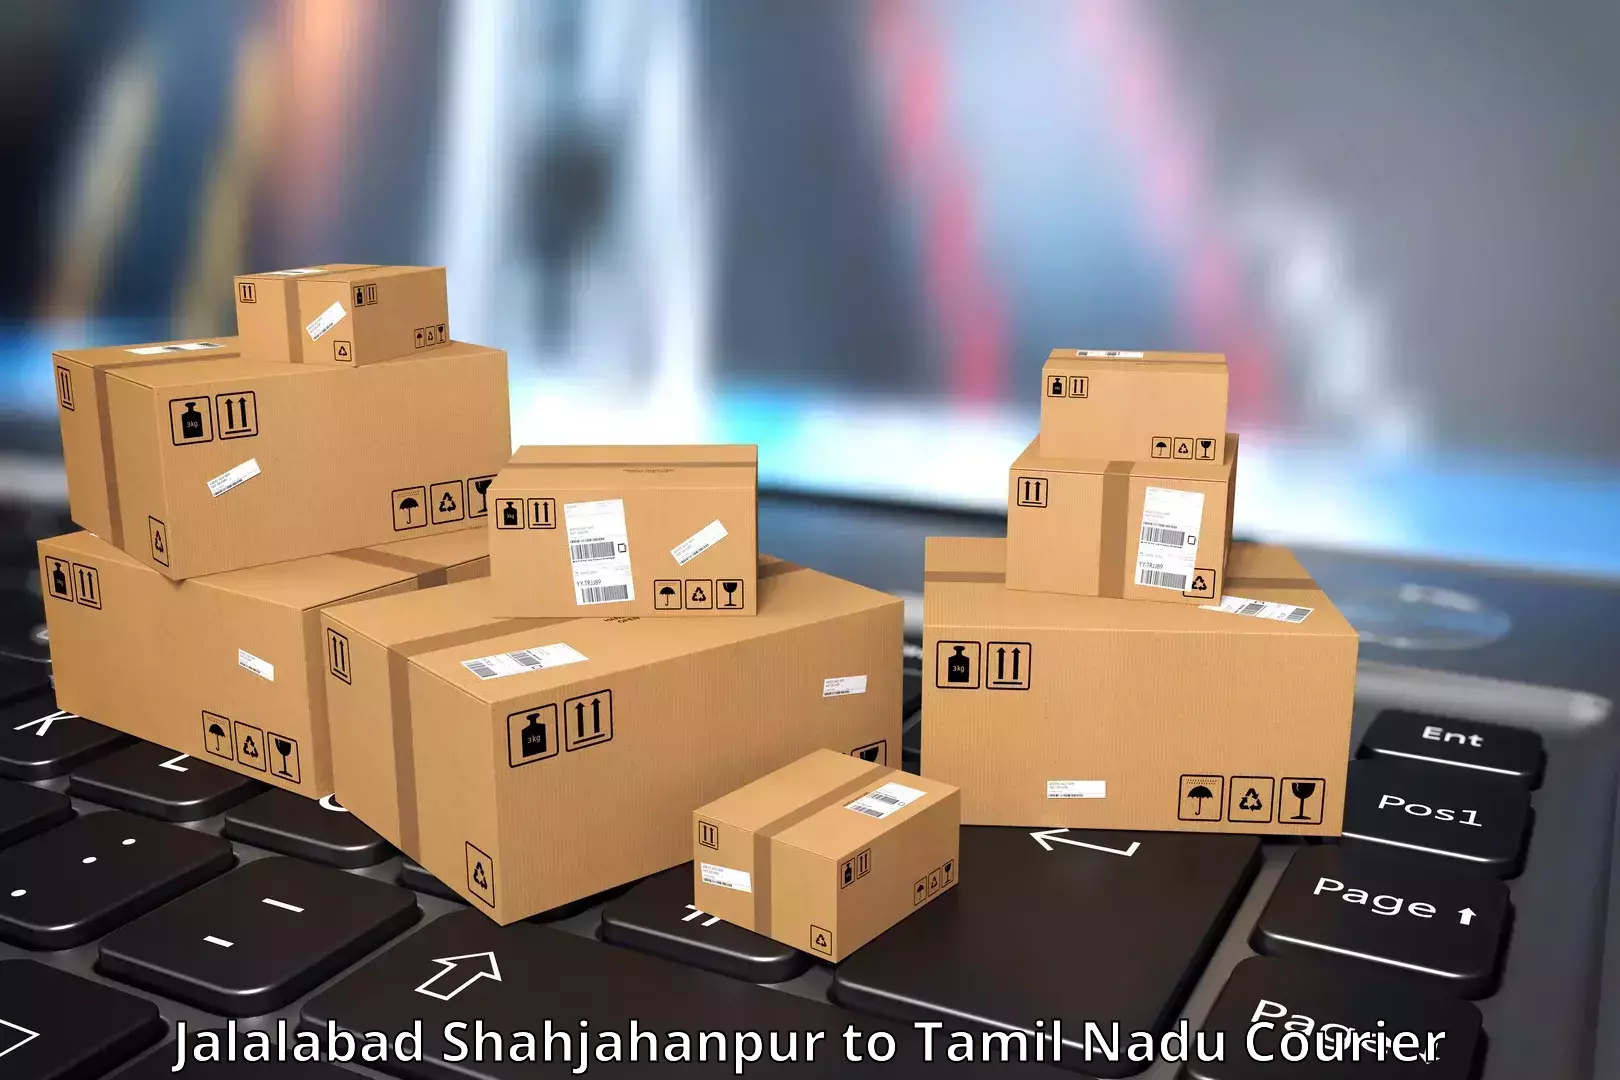 Flexible delivery scheduling Jalalabad Shahjahanpur to Tamil Nadu